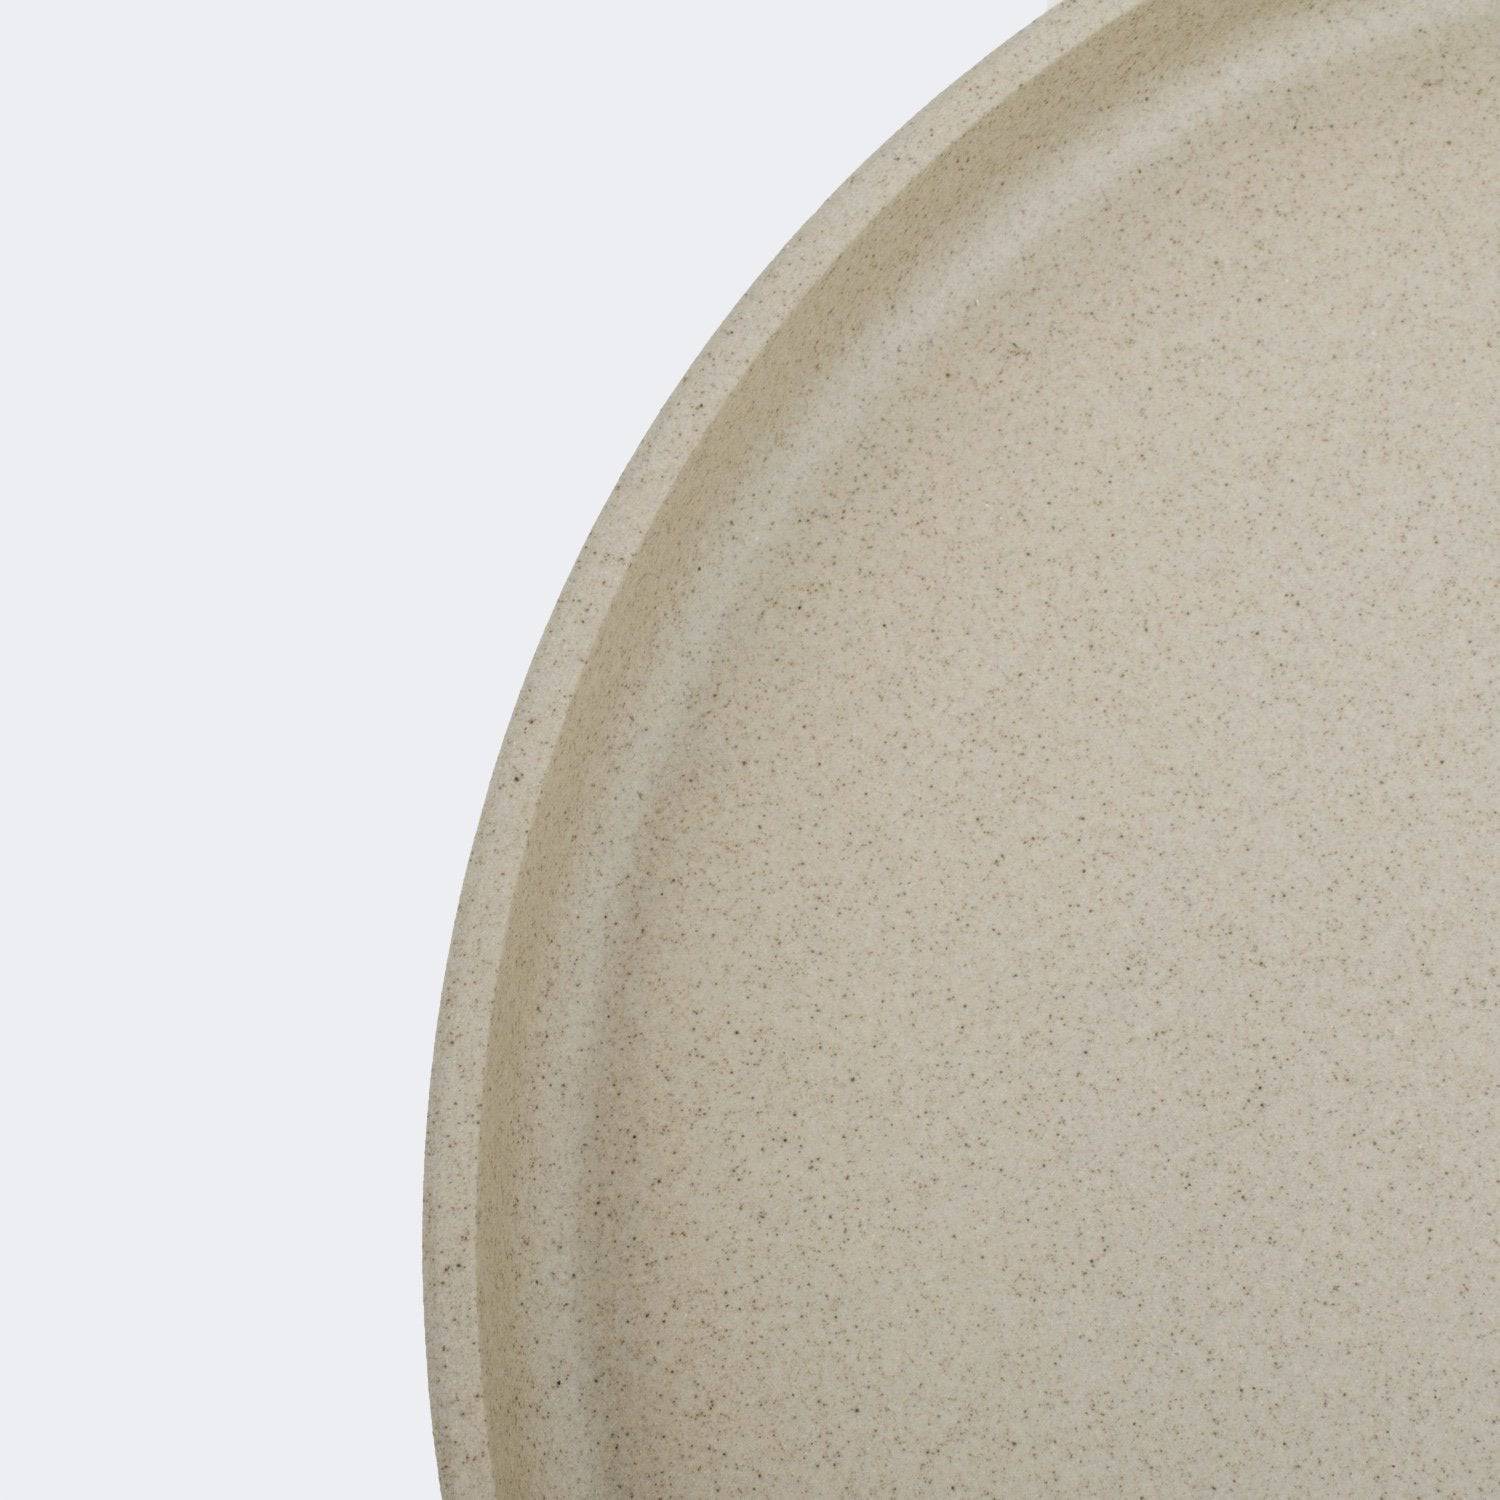 Hasami Porcelain Plate in Natural - KANSO